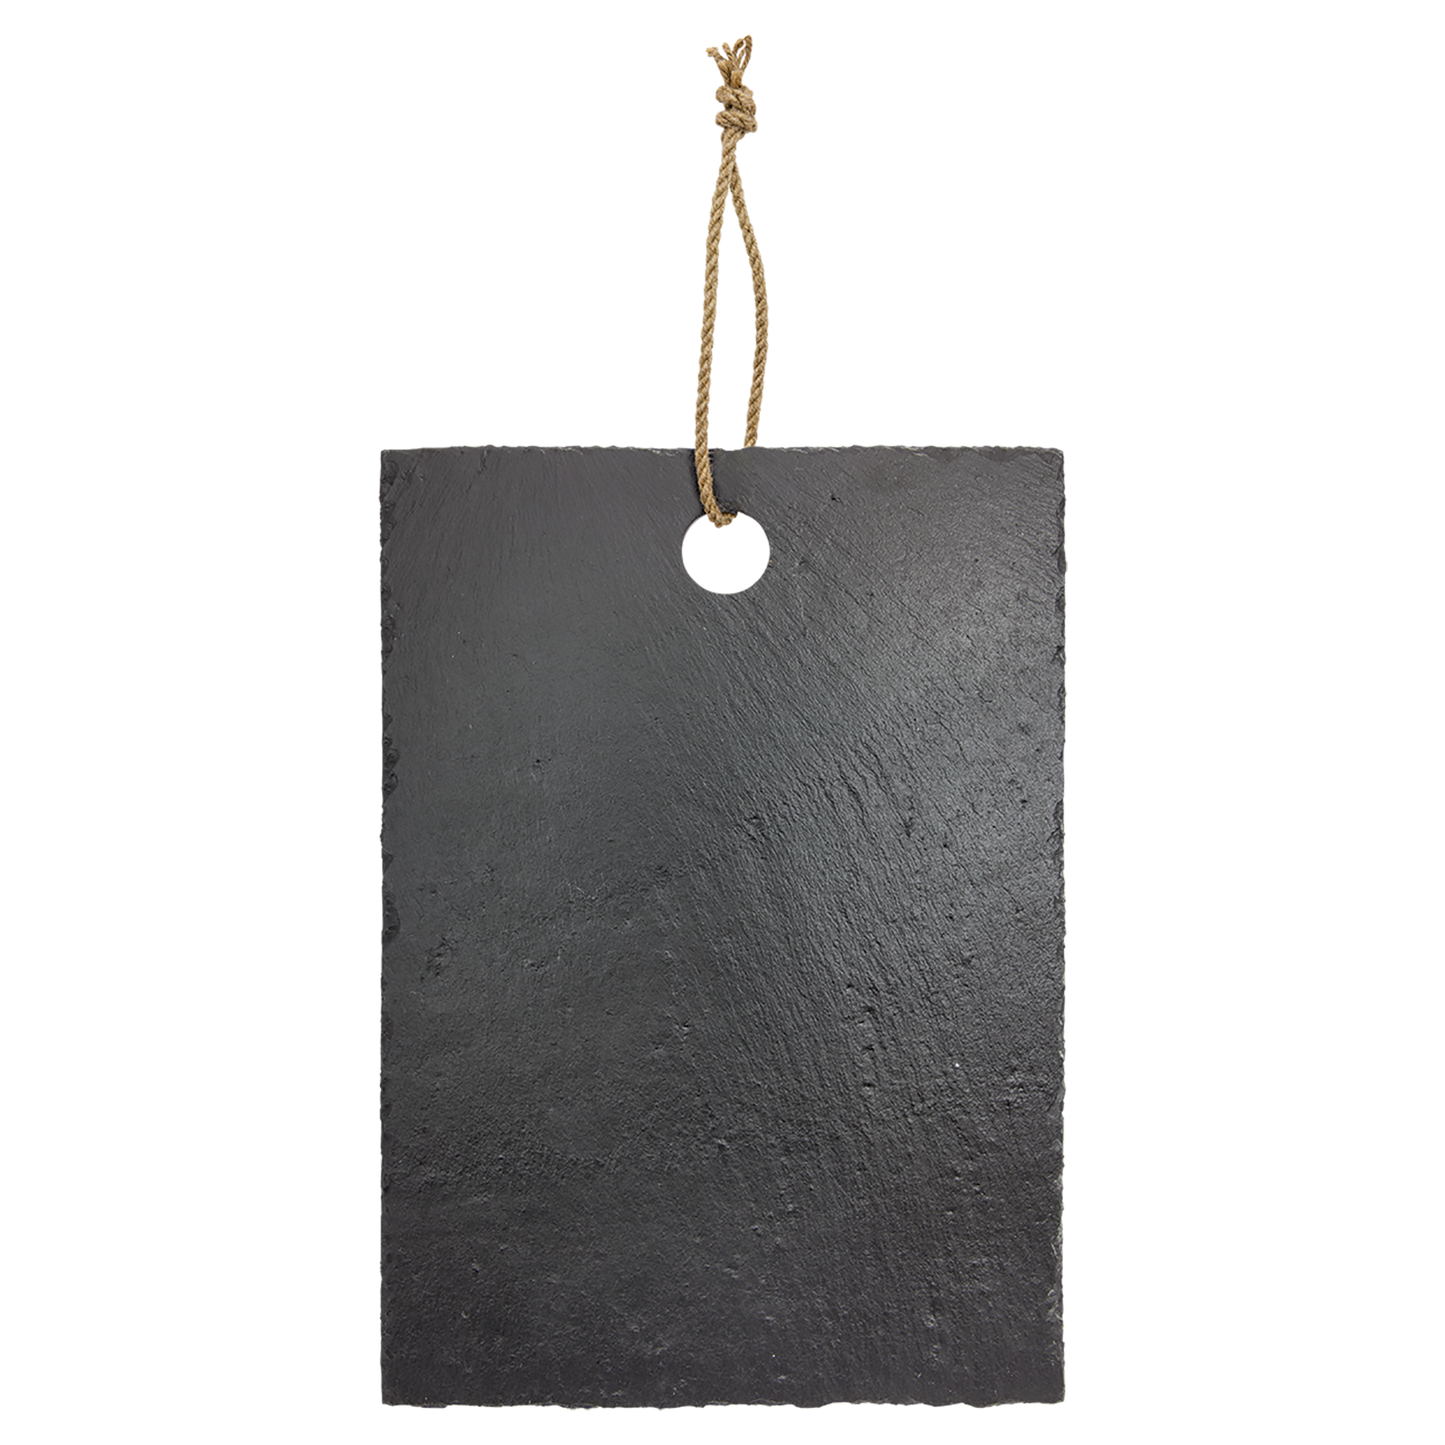 Slate Cutting Board with Hanger String - Beacon Laser Creations LLC